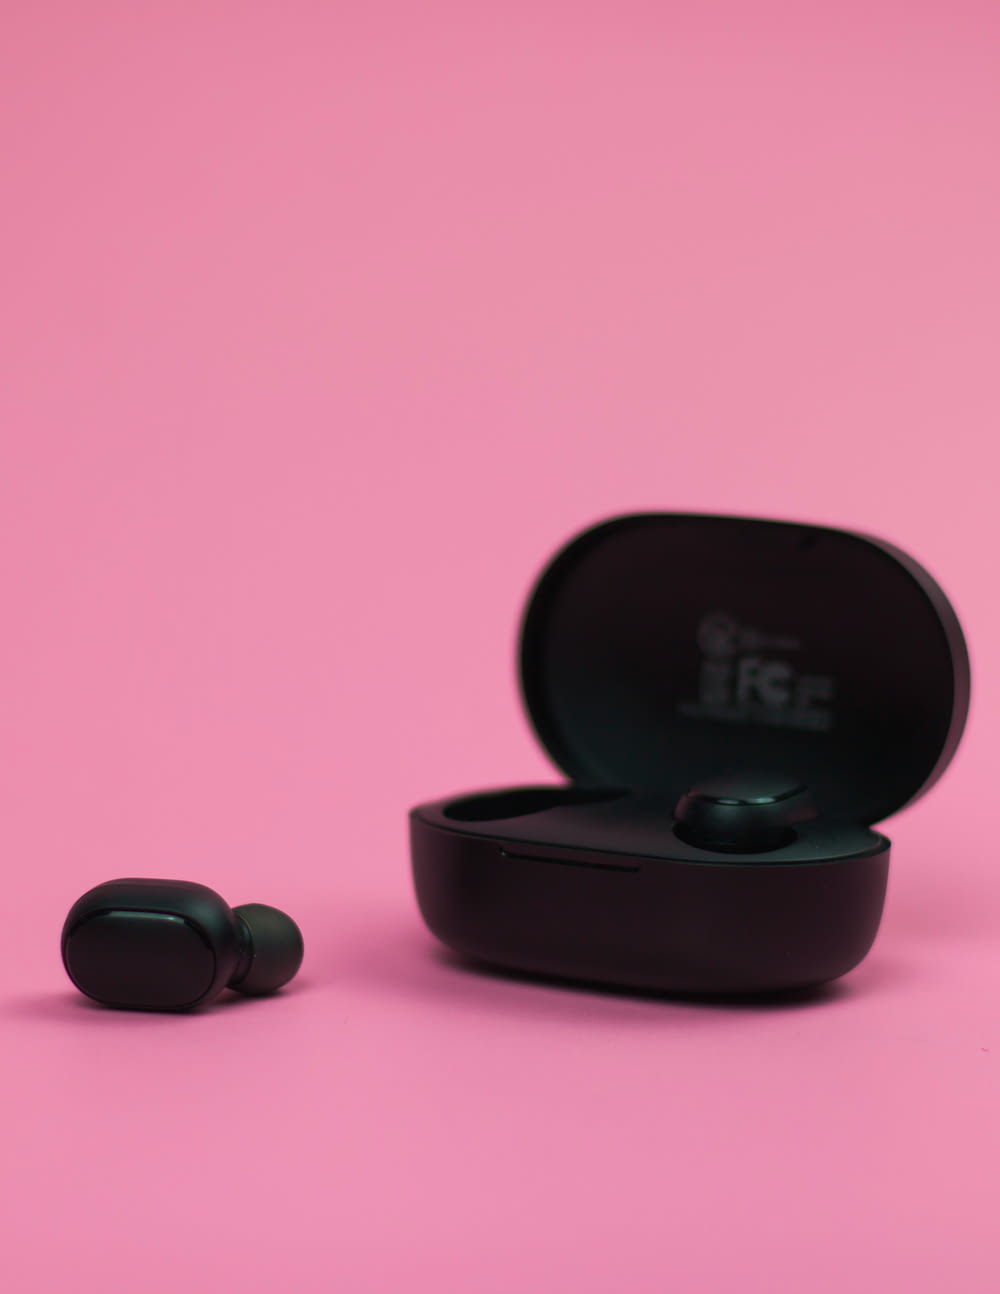 a pair of ear buds sitting on top of a pink surface